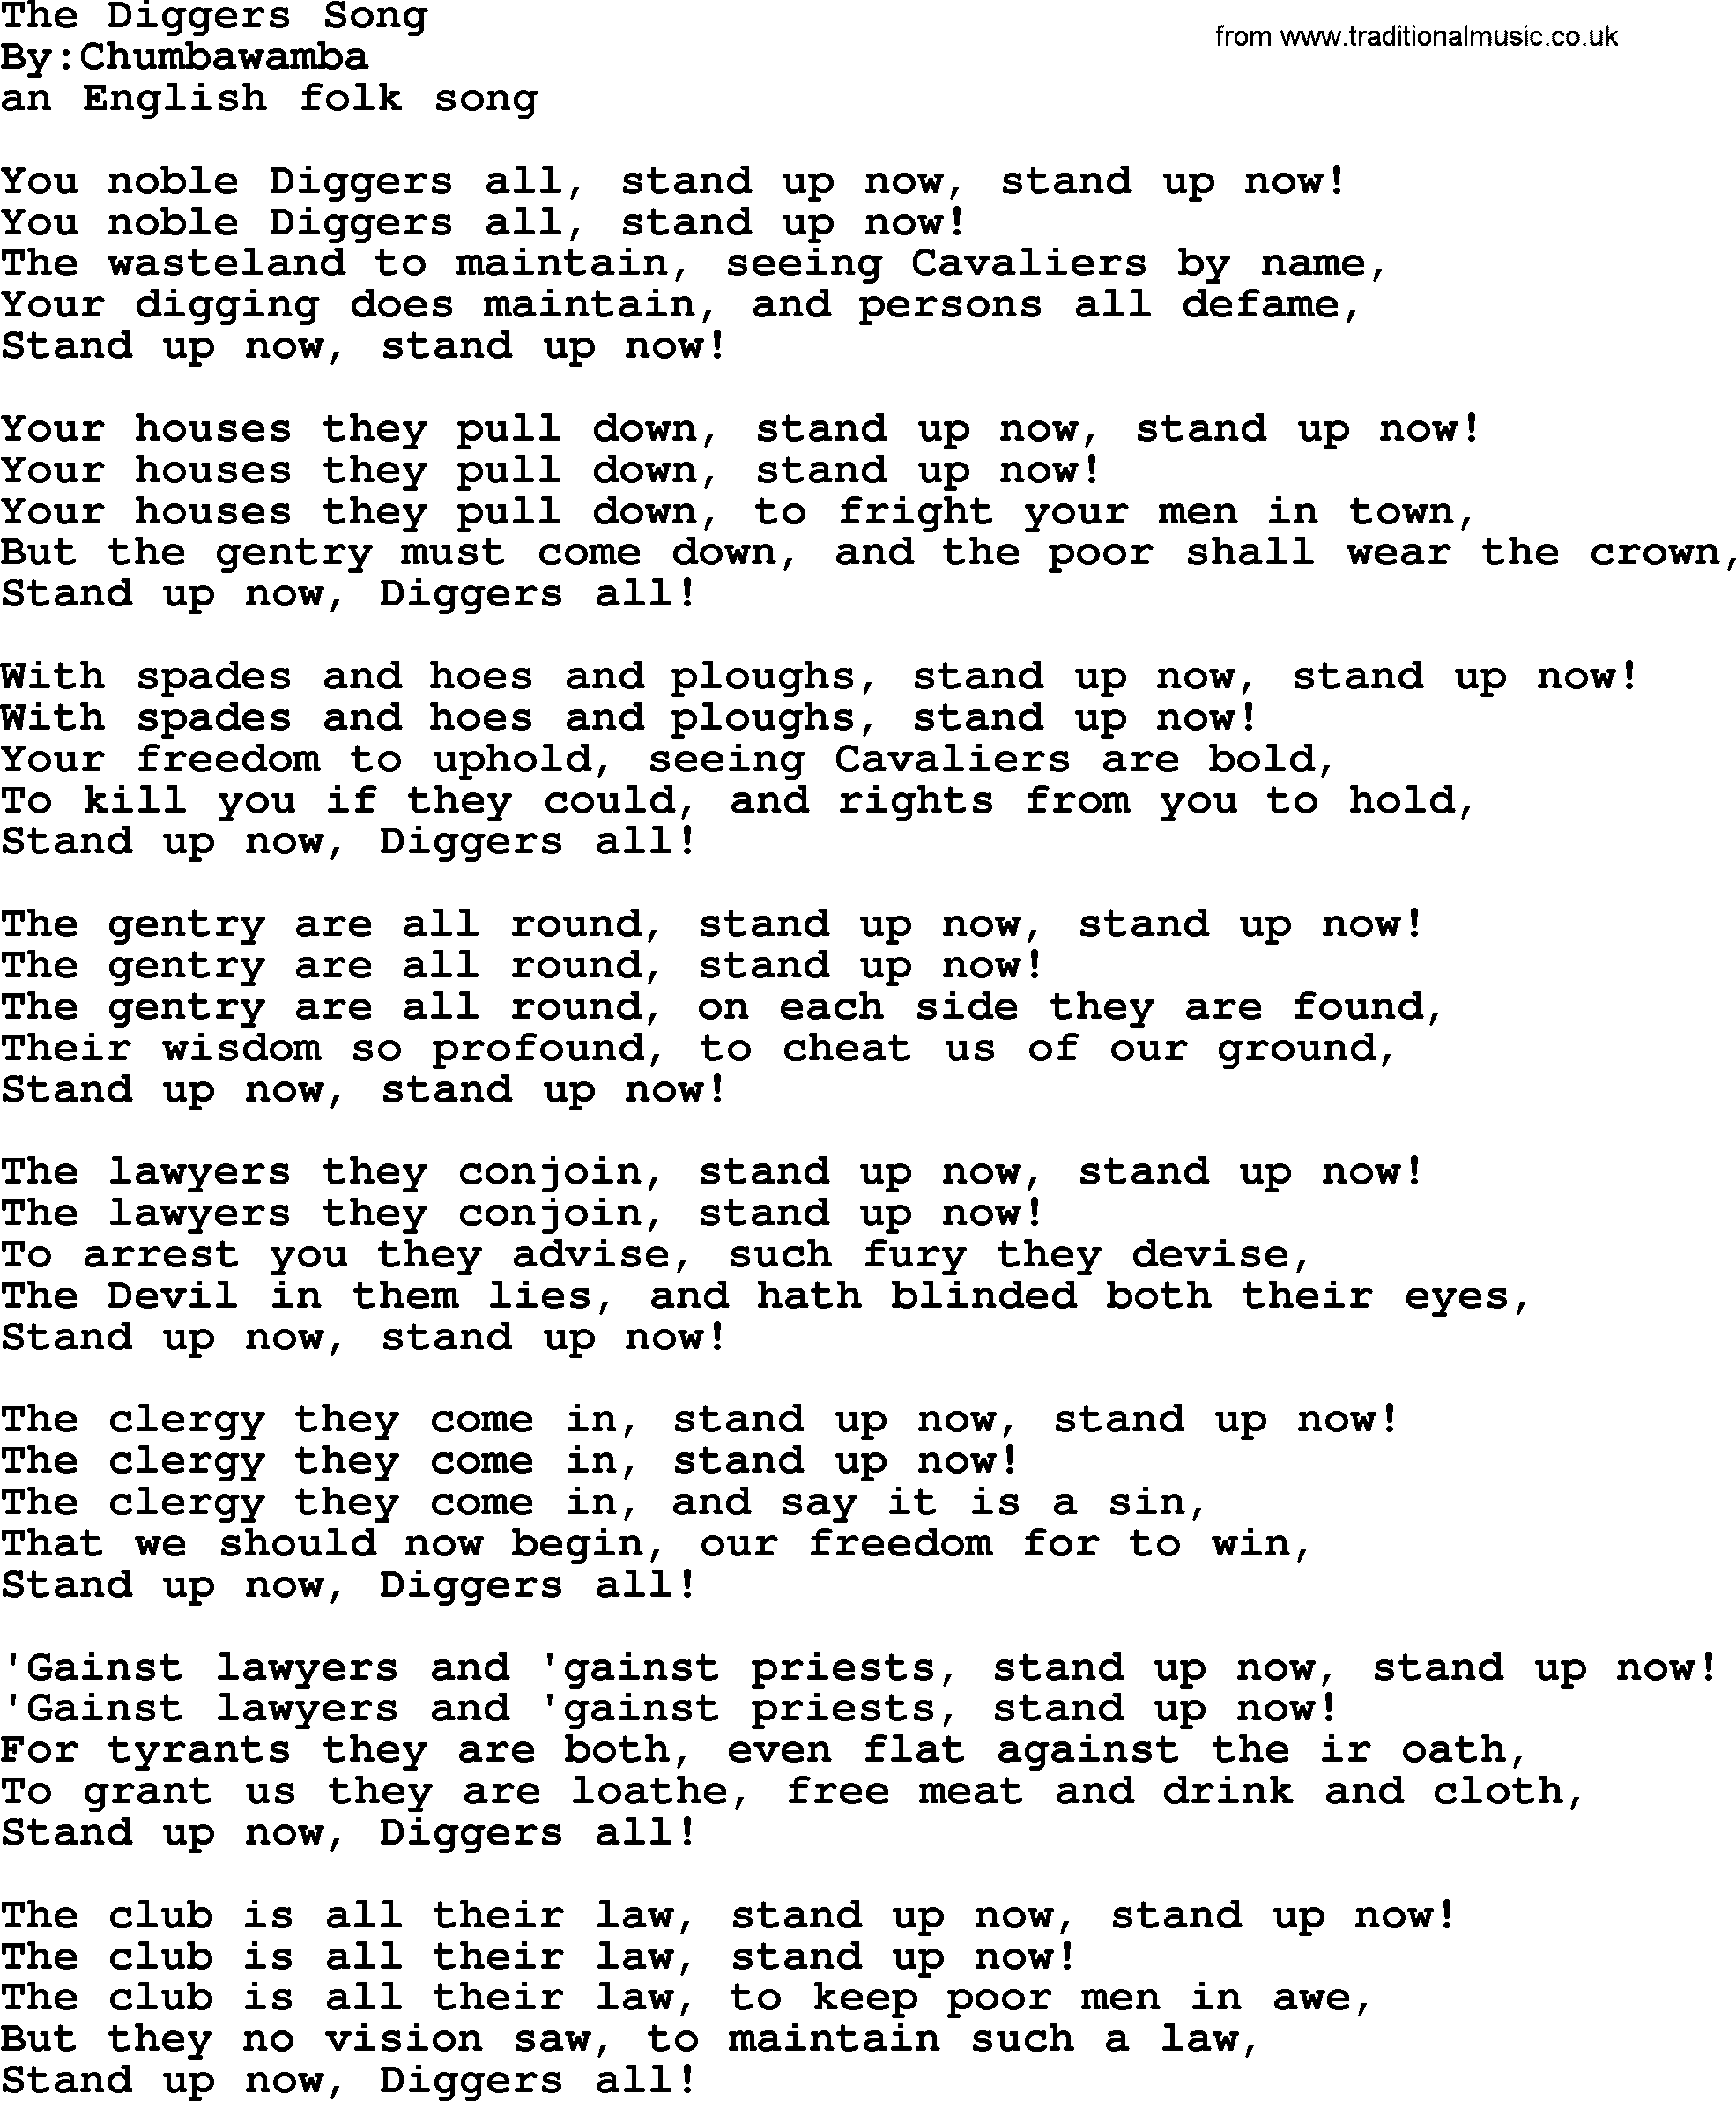 Political, Solidarity, Workers or Union song: The Diggers Song, lyrics